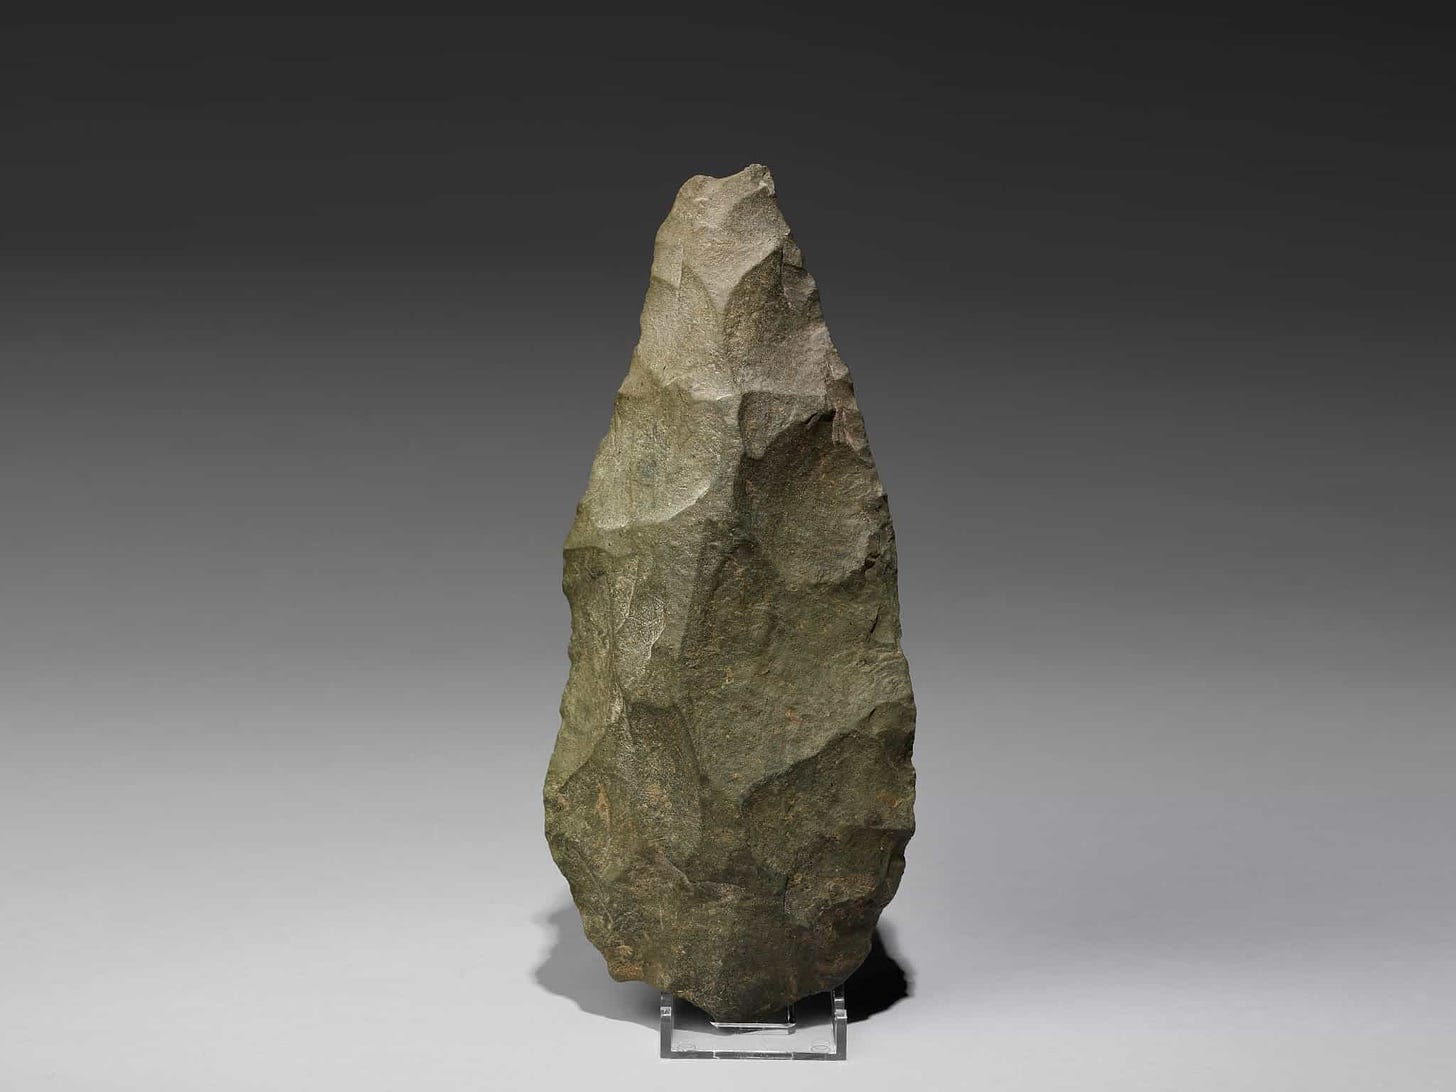 [enable images to see the handaxe]